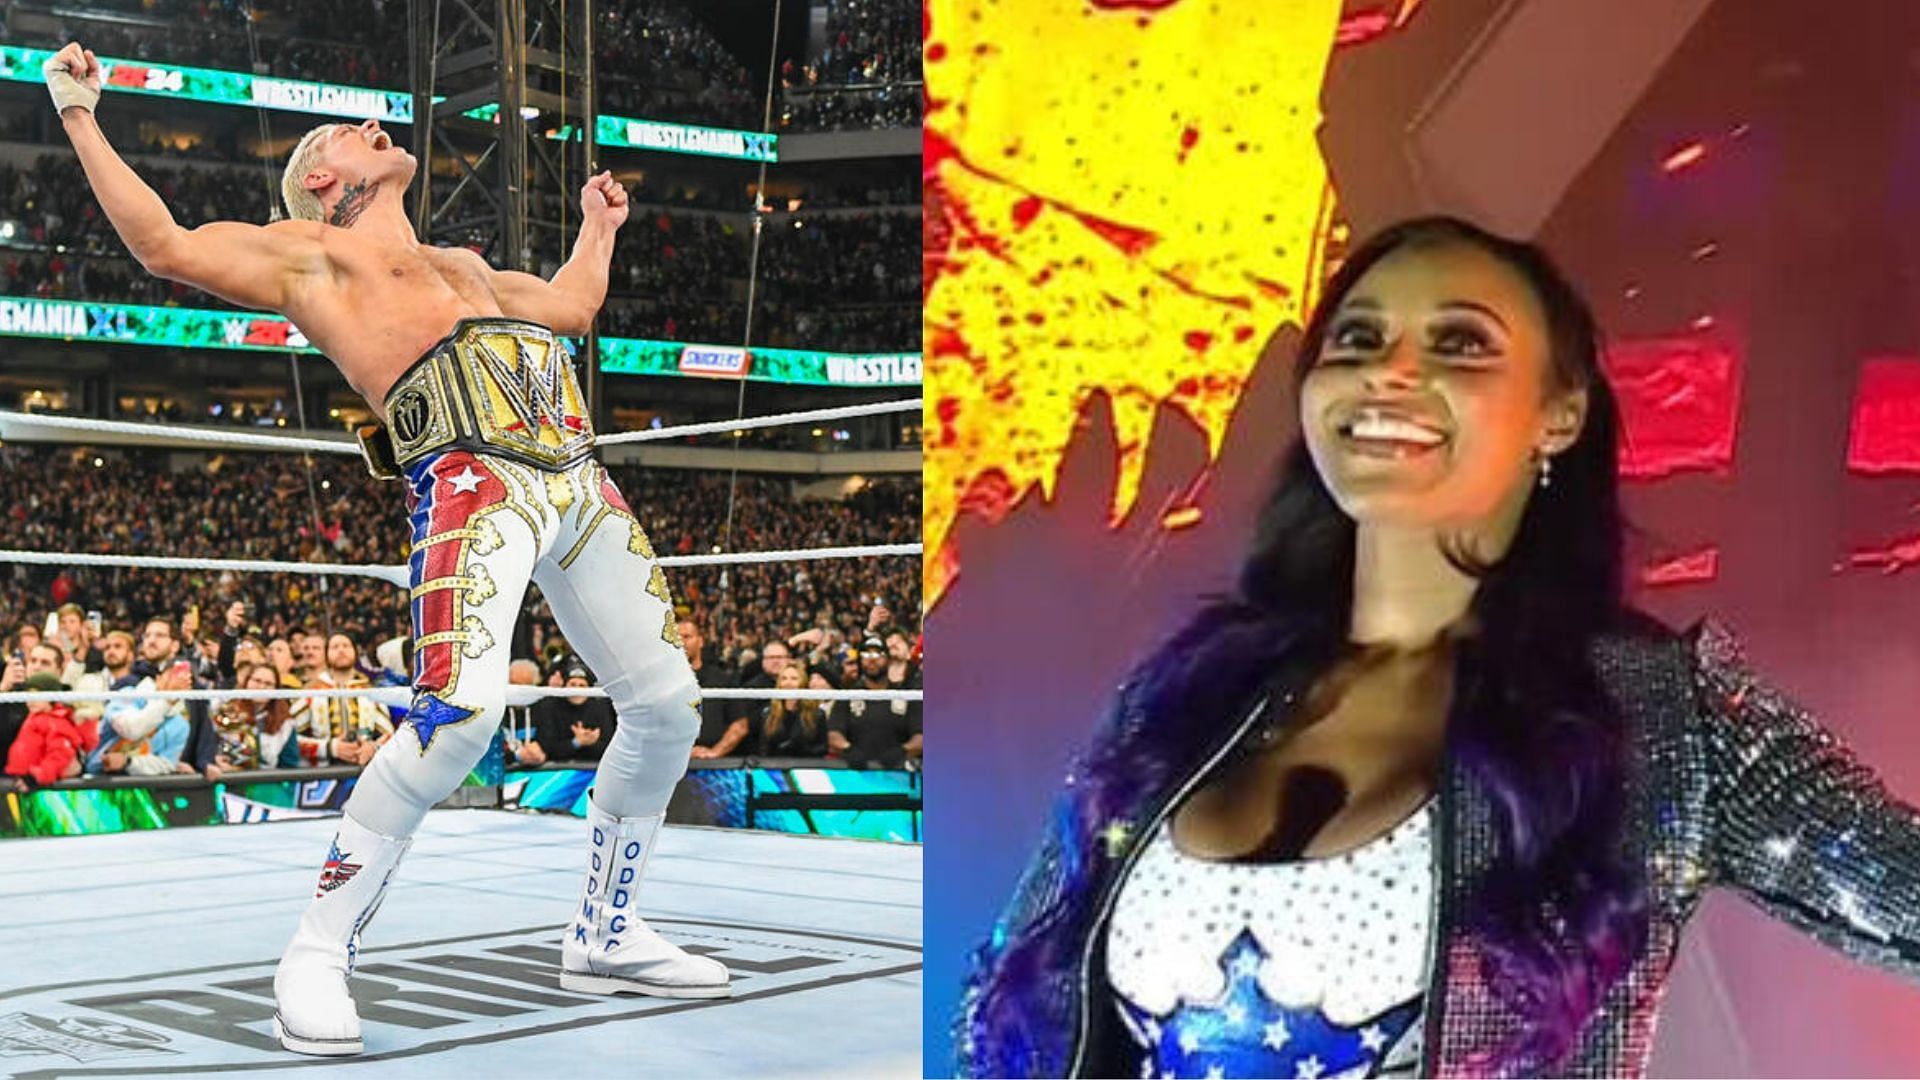 Cody Rhodes and Brandi Rhodes celebrated after Cody